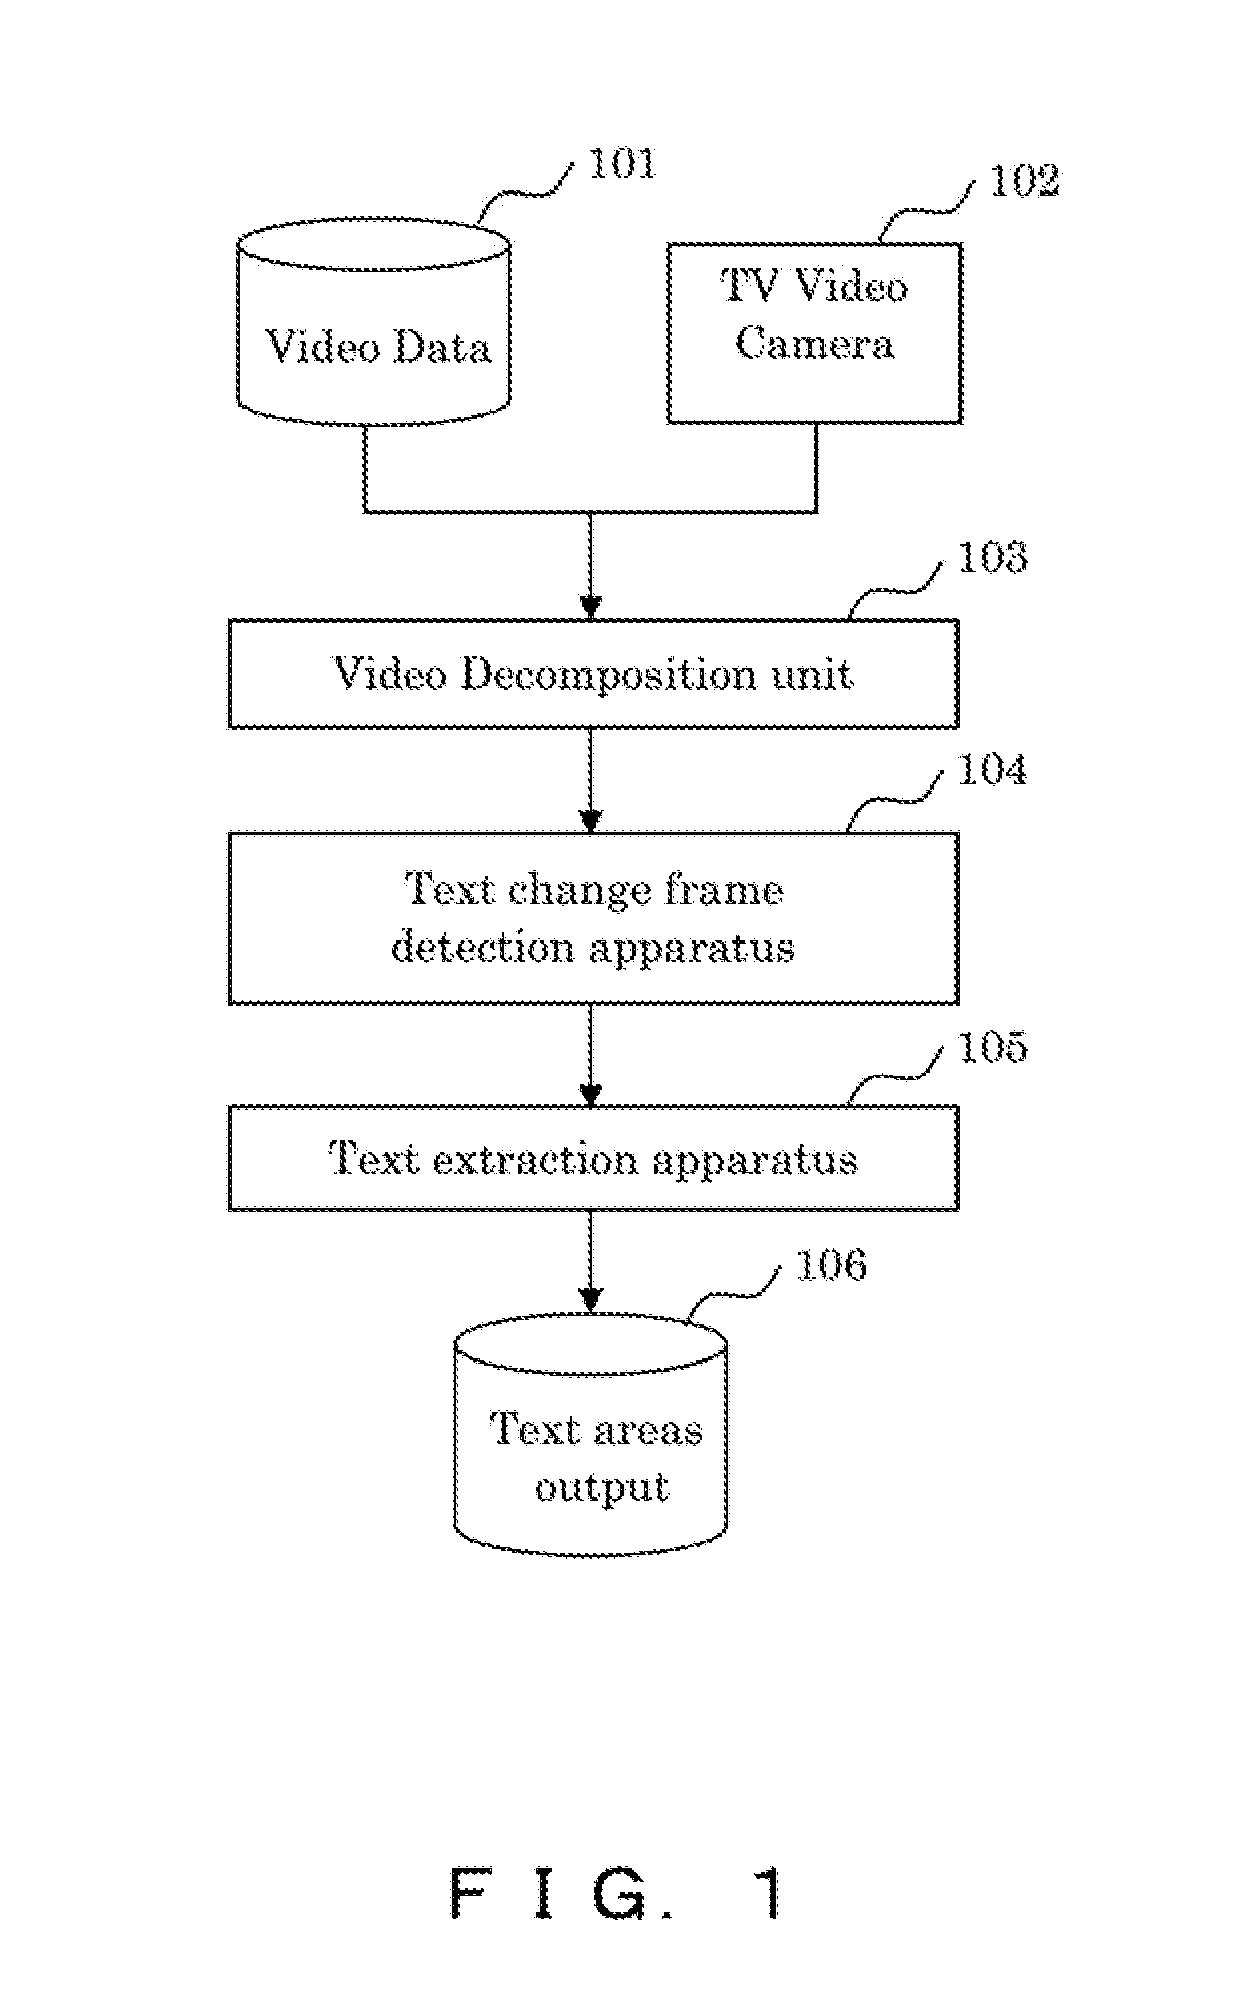 Video text processing apparatus